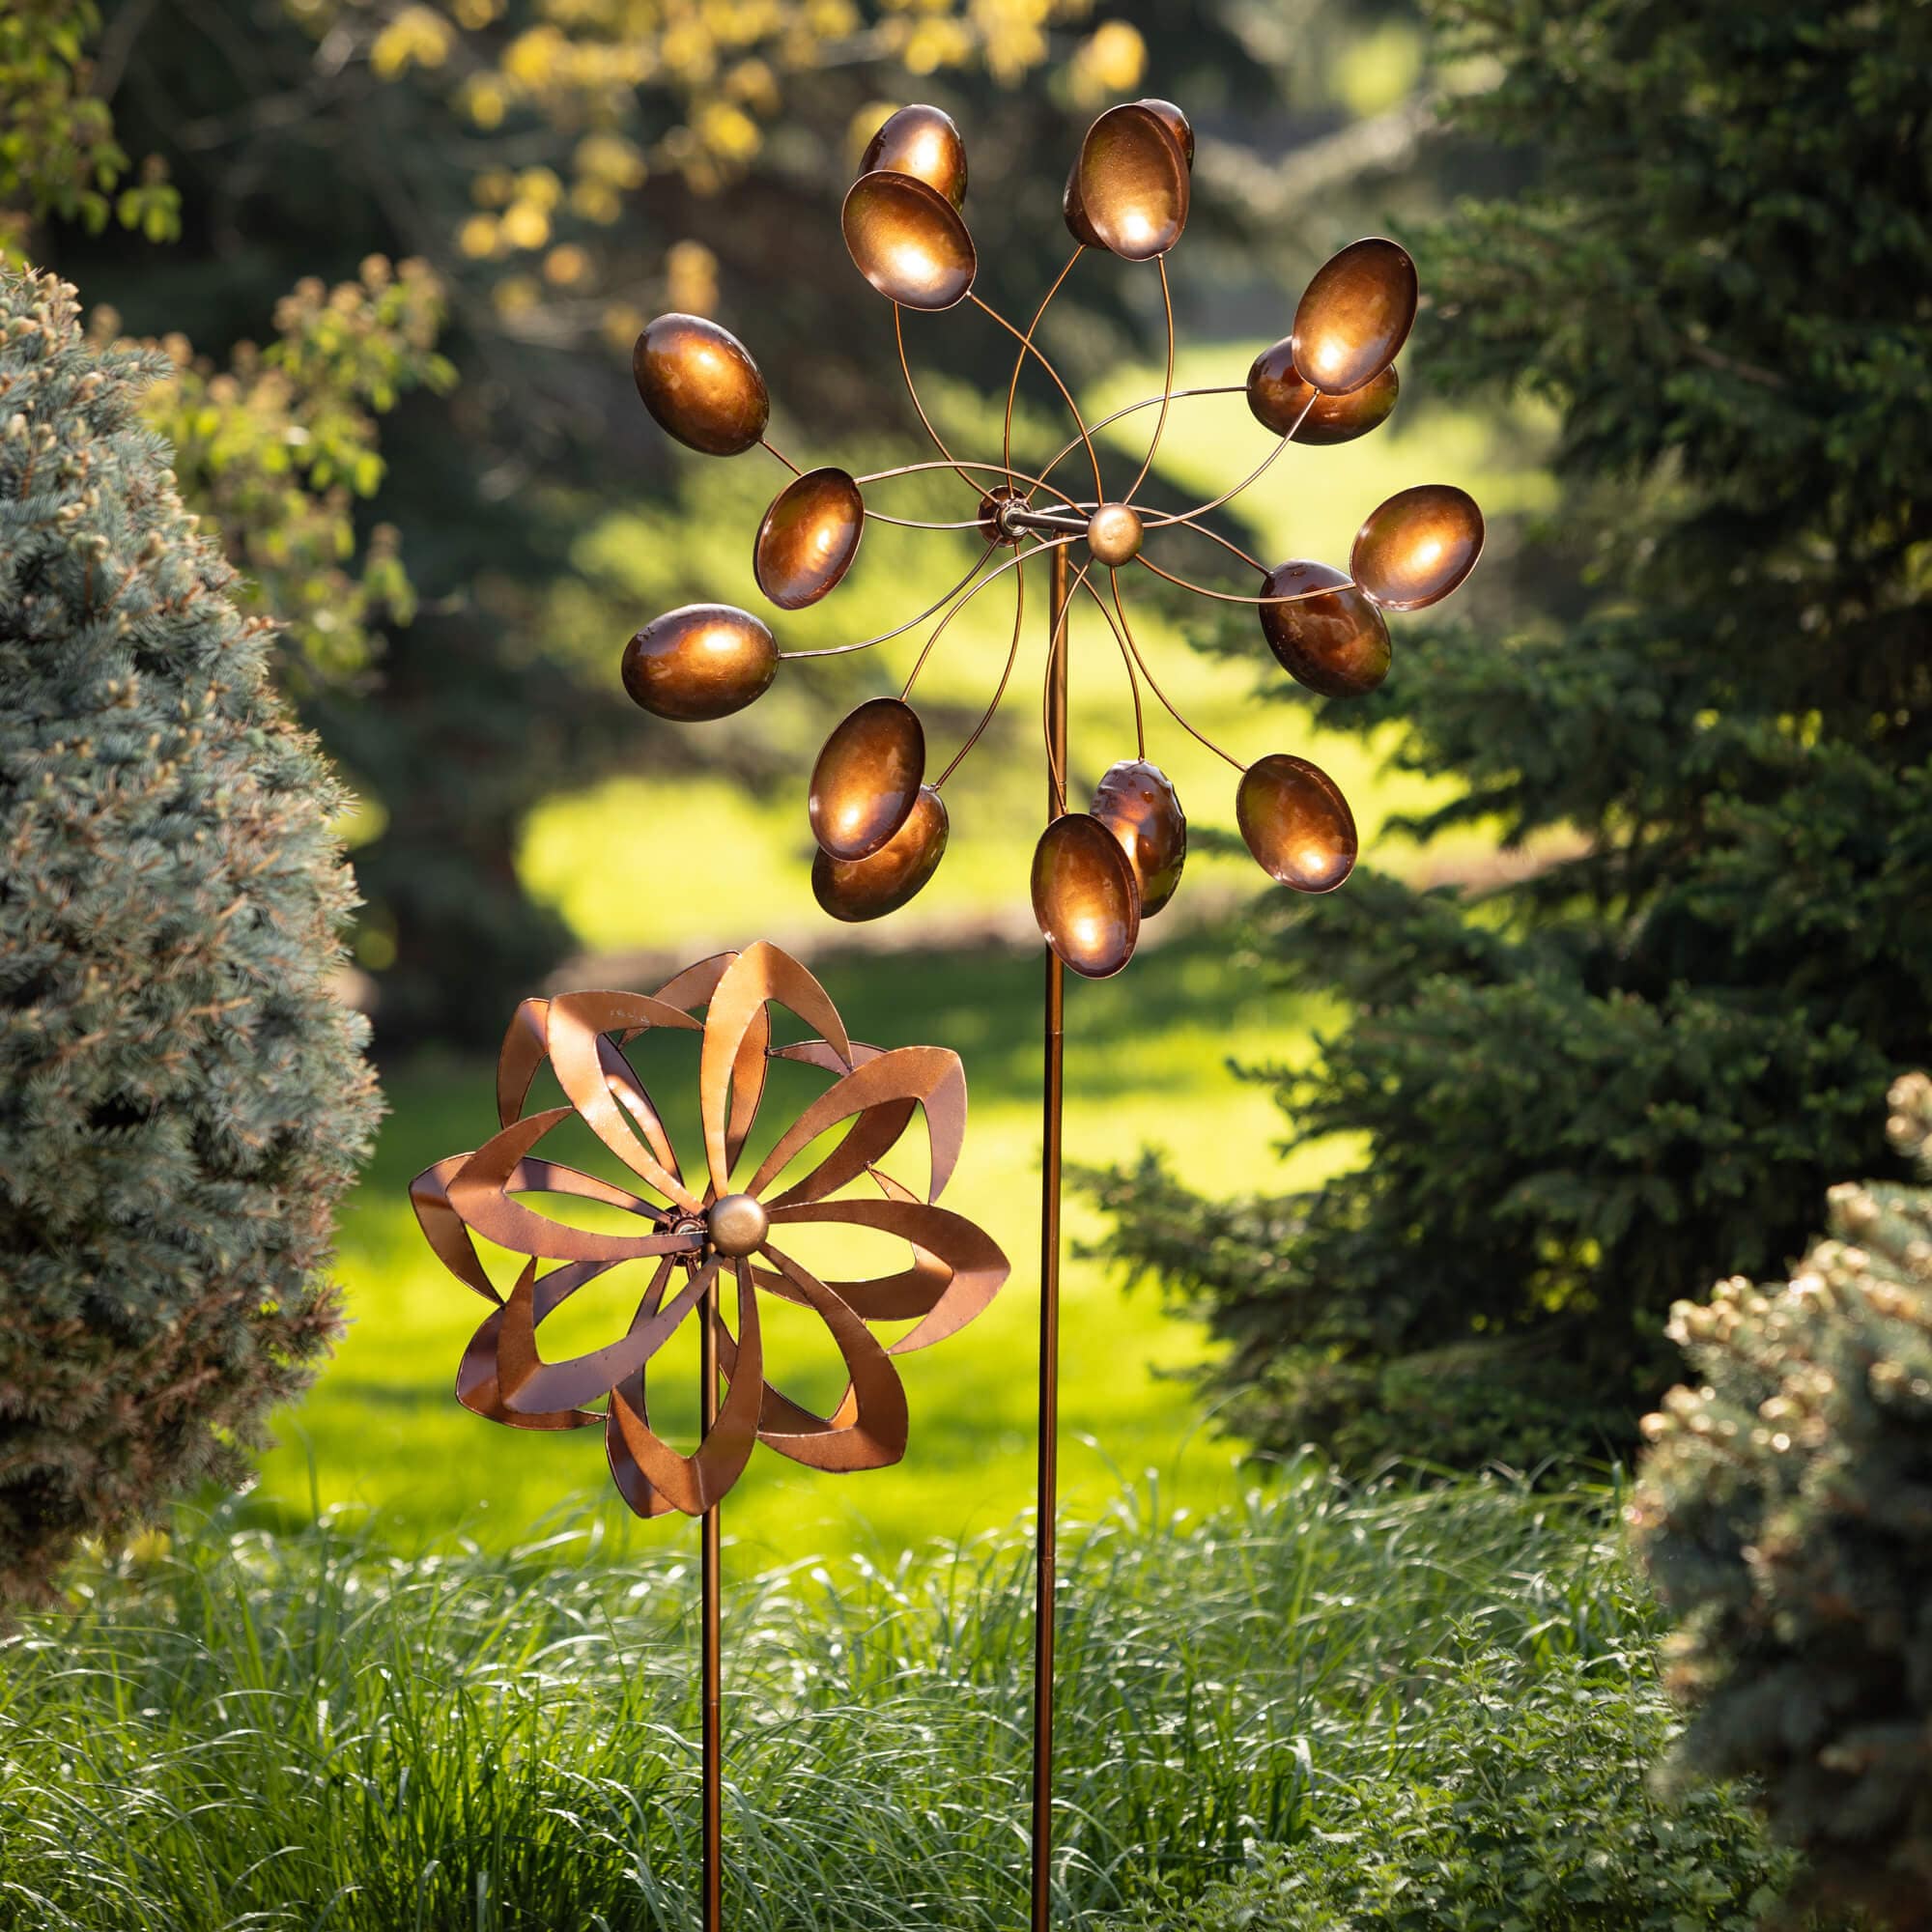 Spinning Circular Copper Kinetic Sculpture Stake Elevate Home Decor - Outdoors